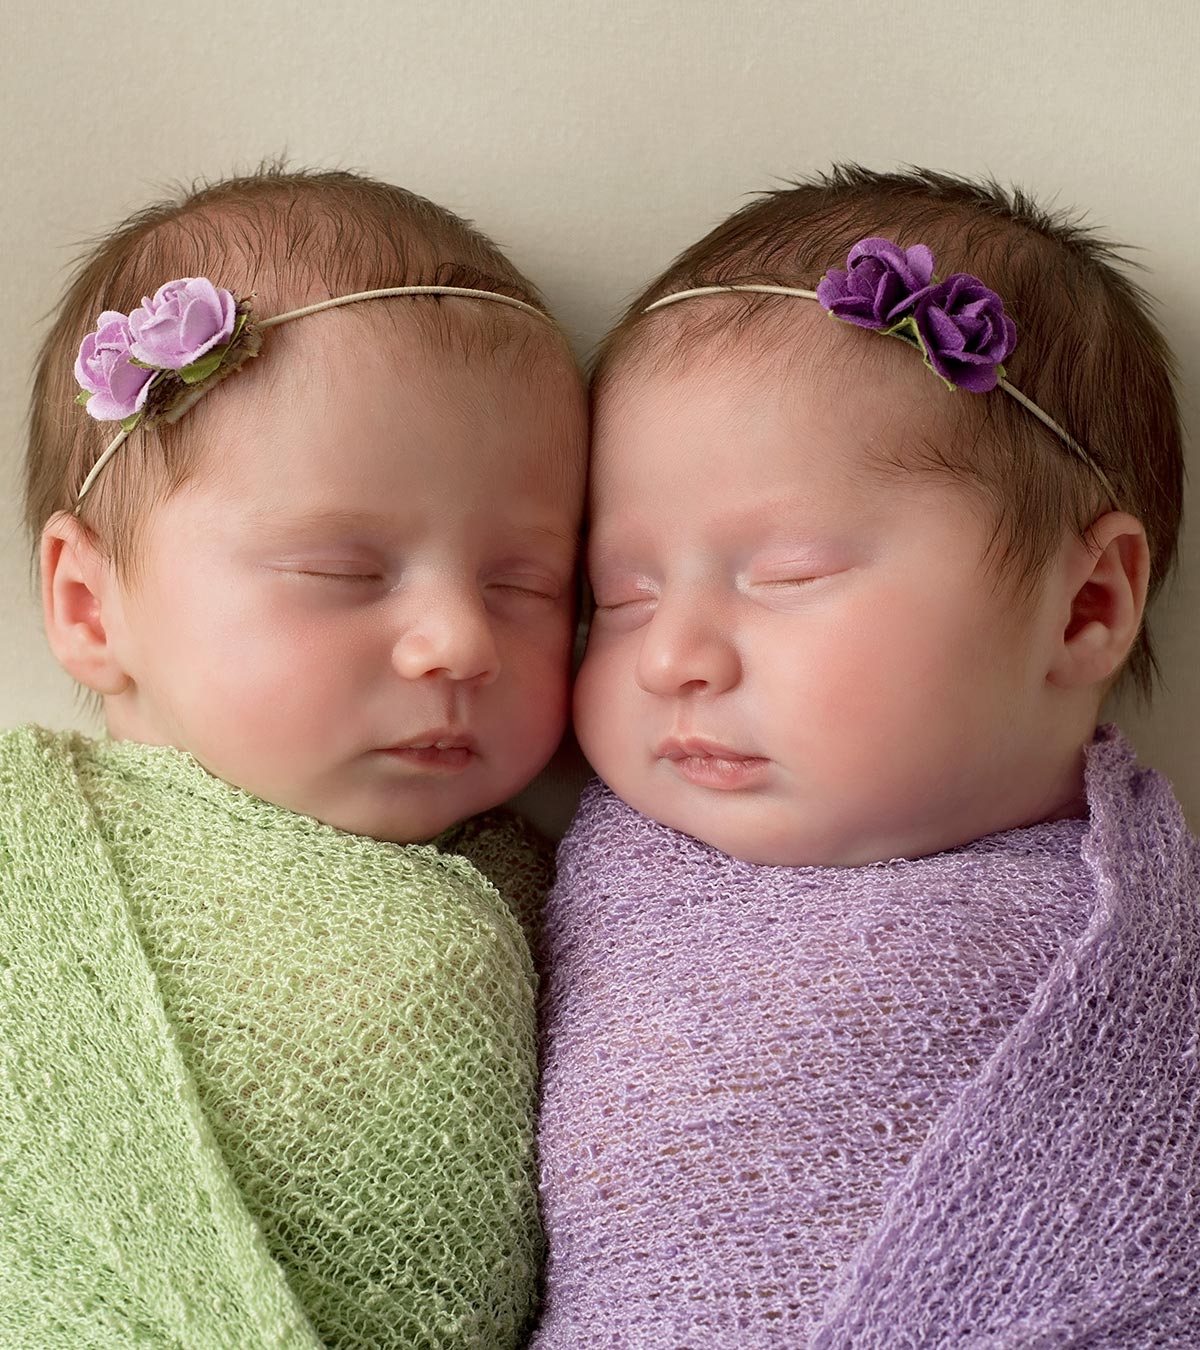 Twin names: 500 of the best baby name ideas for twin boys and twin girls